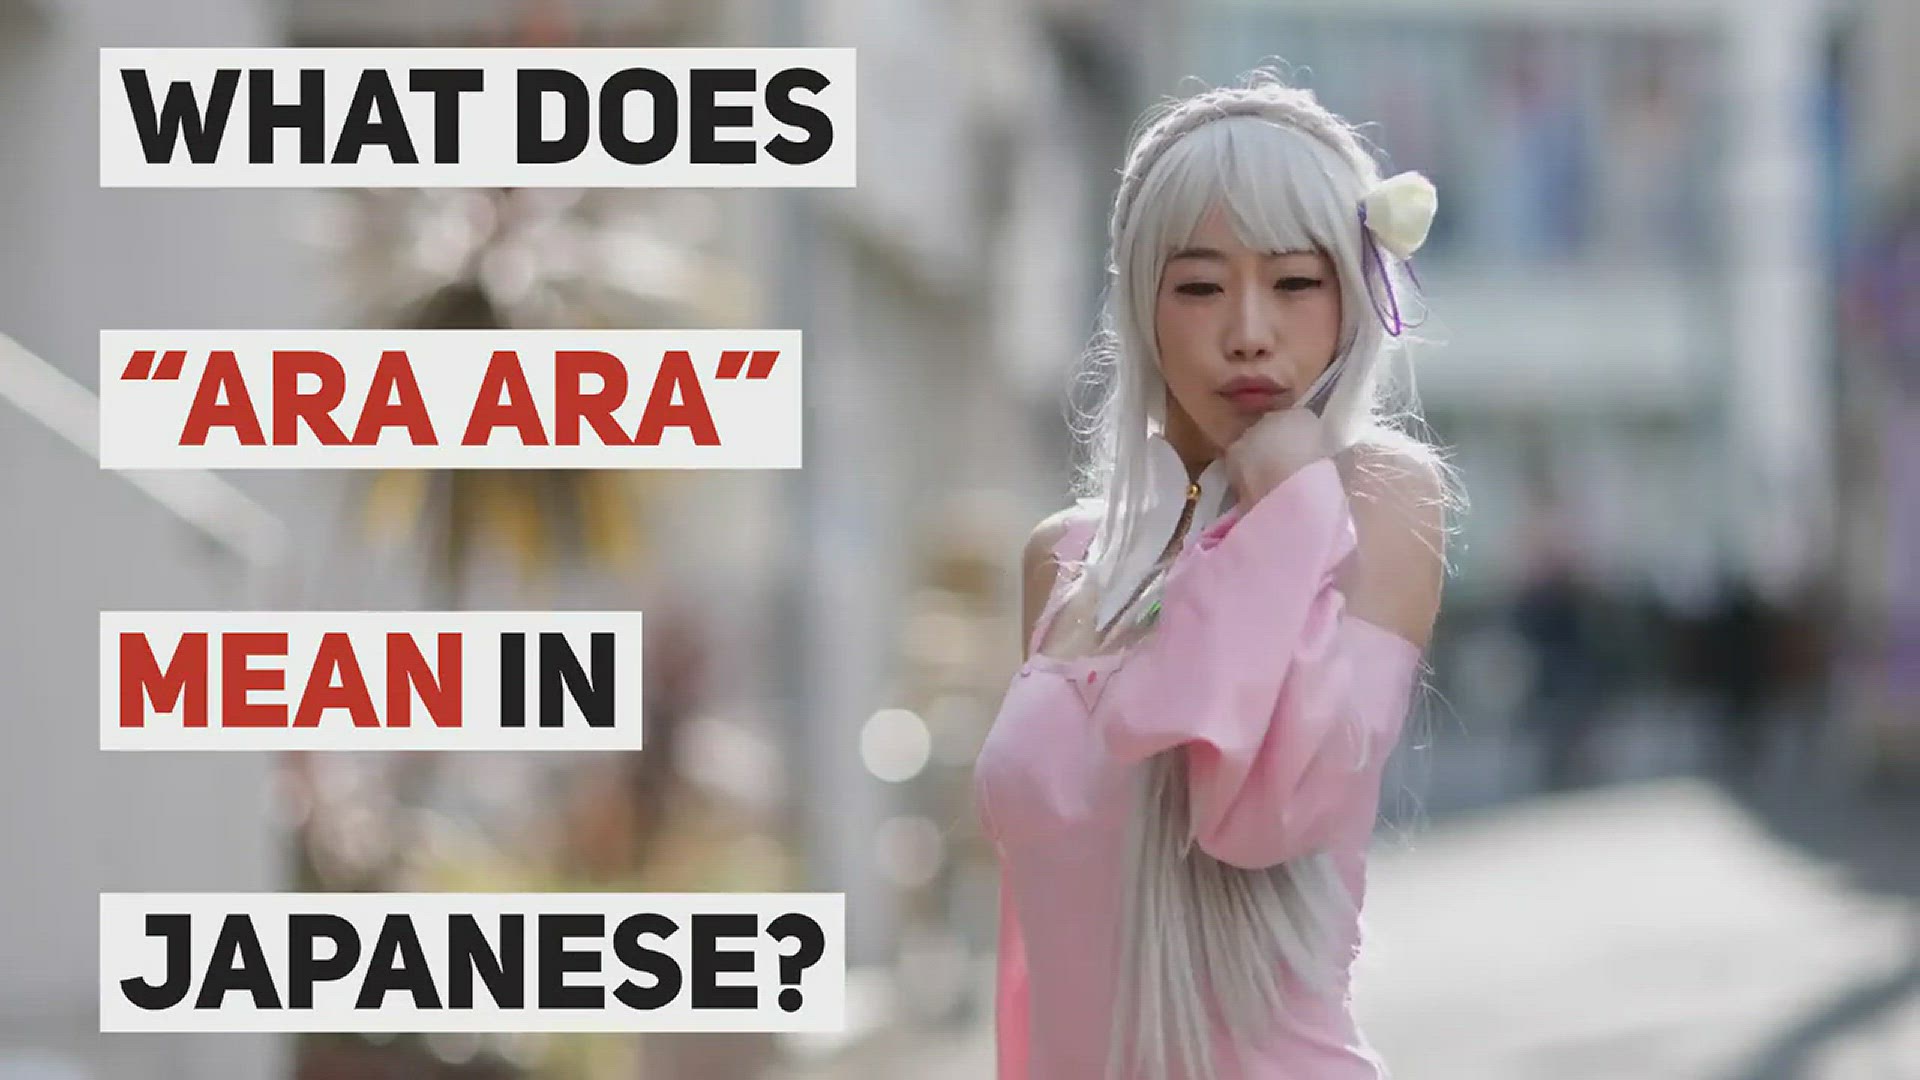 'Video thumbnail for What Does “Ara Ara” Mean in Japanese? (Anime vs Real Life)'